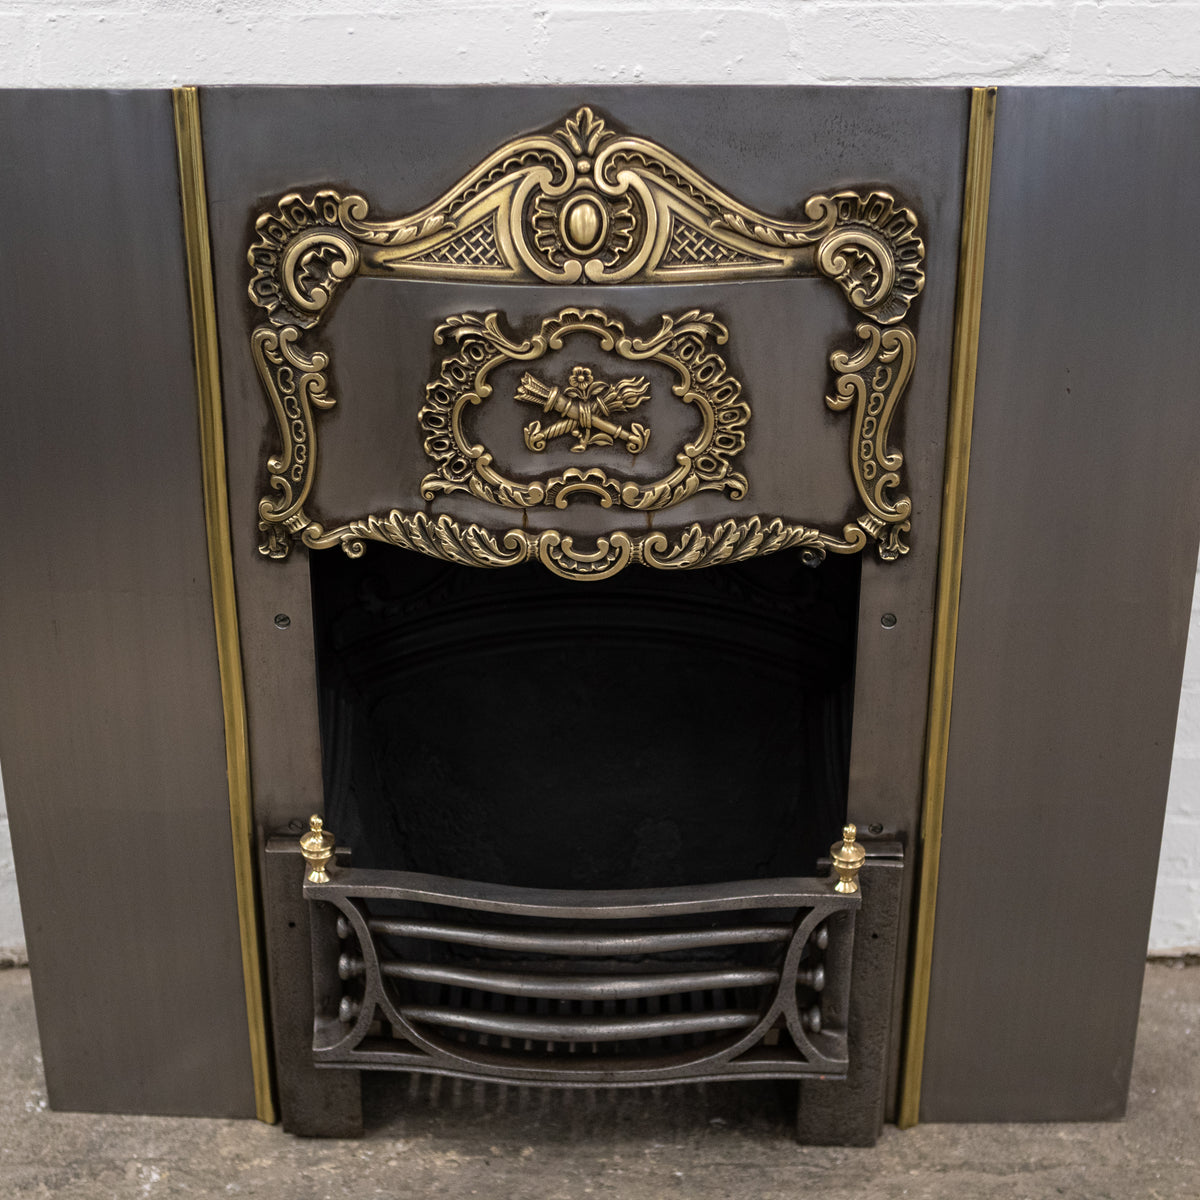 Ornate Antique Polished Cast Iron &amp; Brass Fireplace Insert | The Architectural Forum